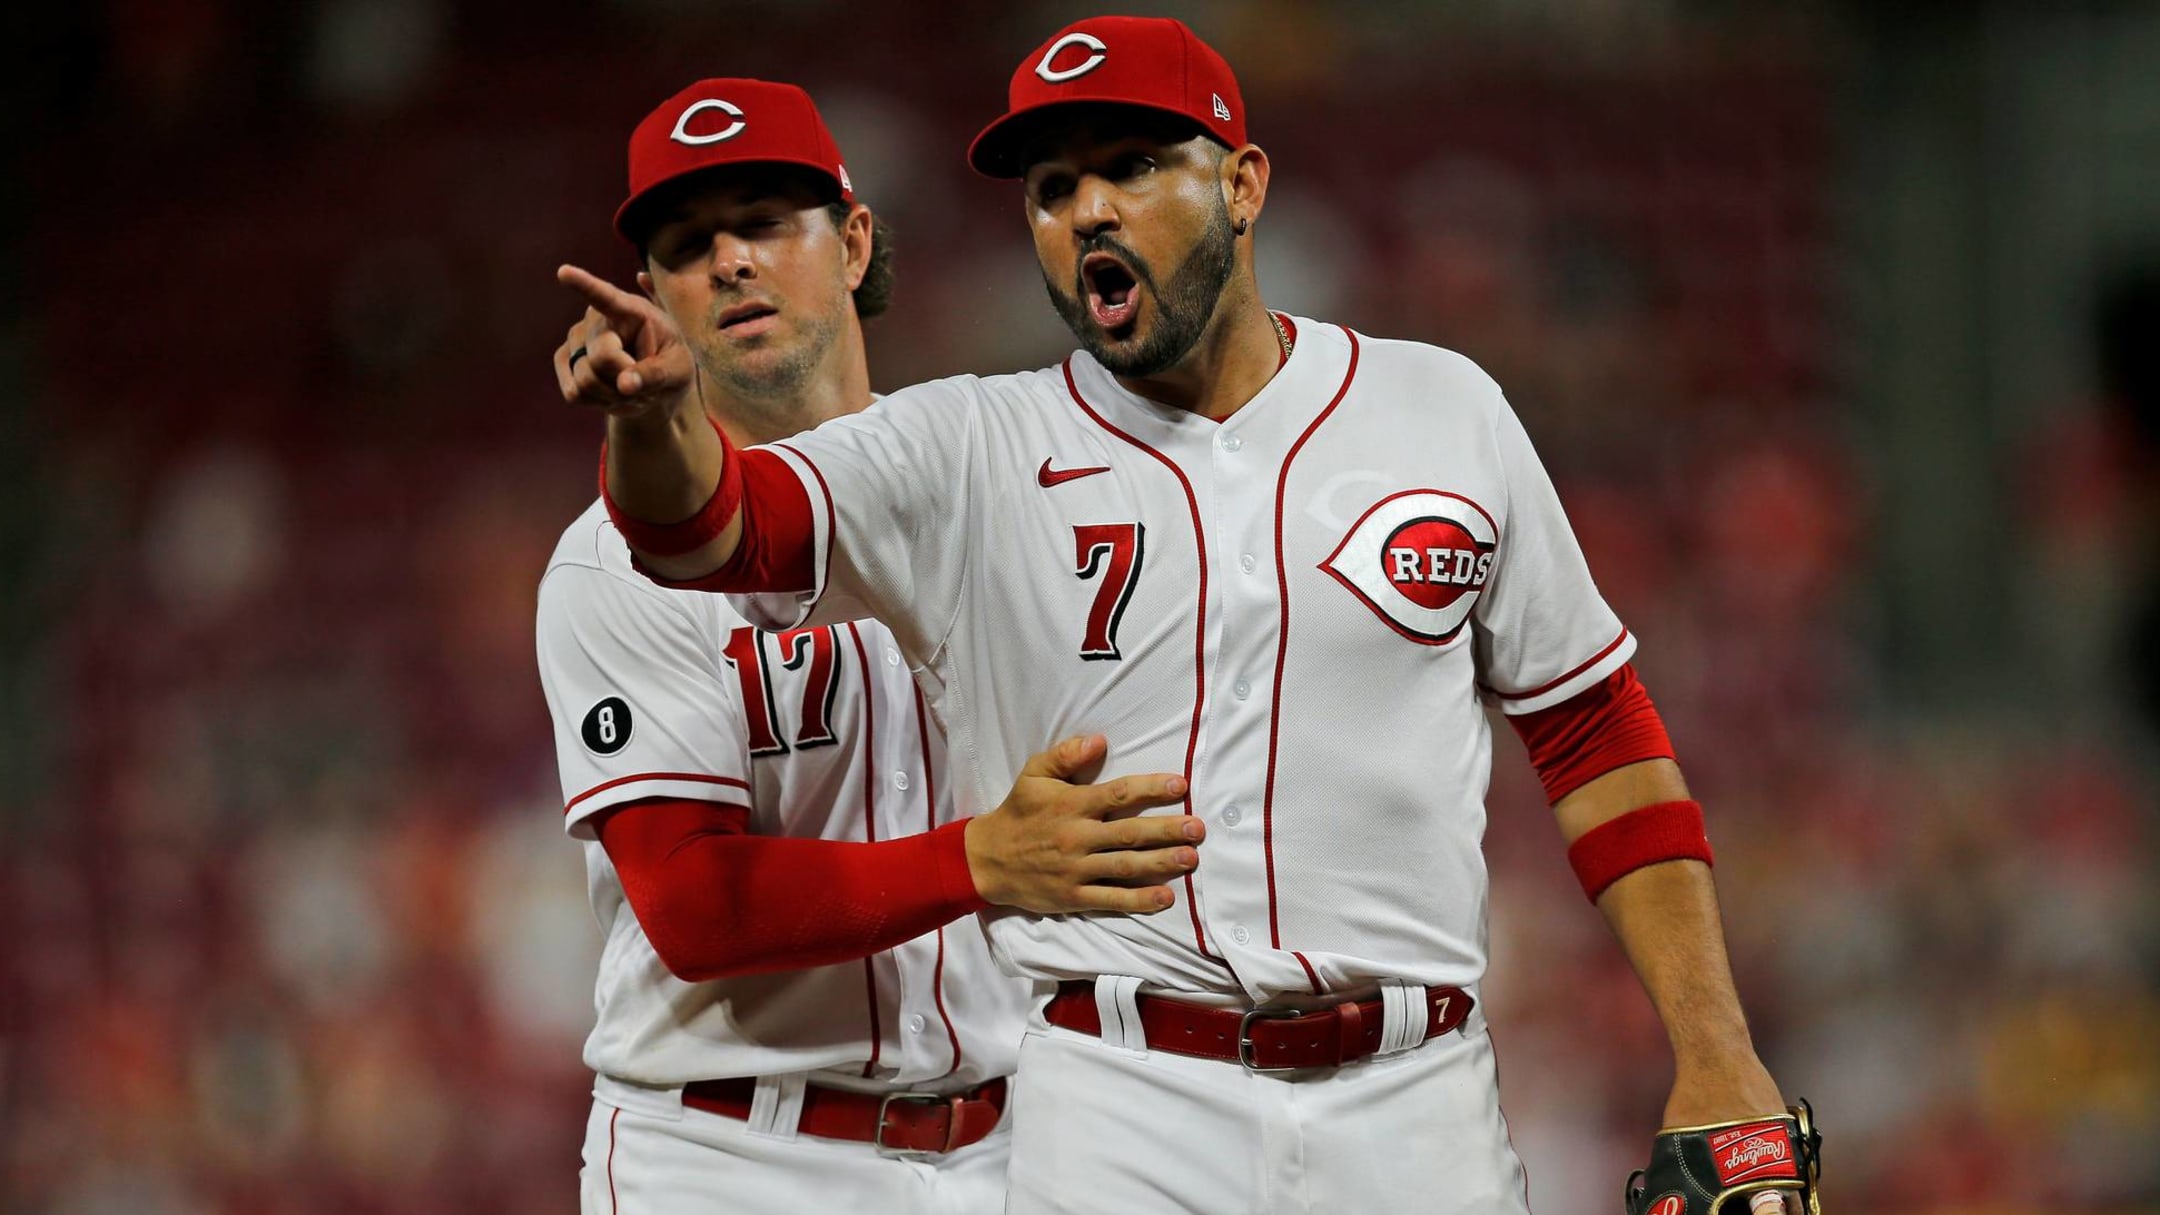 Cost-Cutting Cincinnati Reds 'Must Align Our Payroll To Our Resources